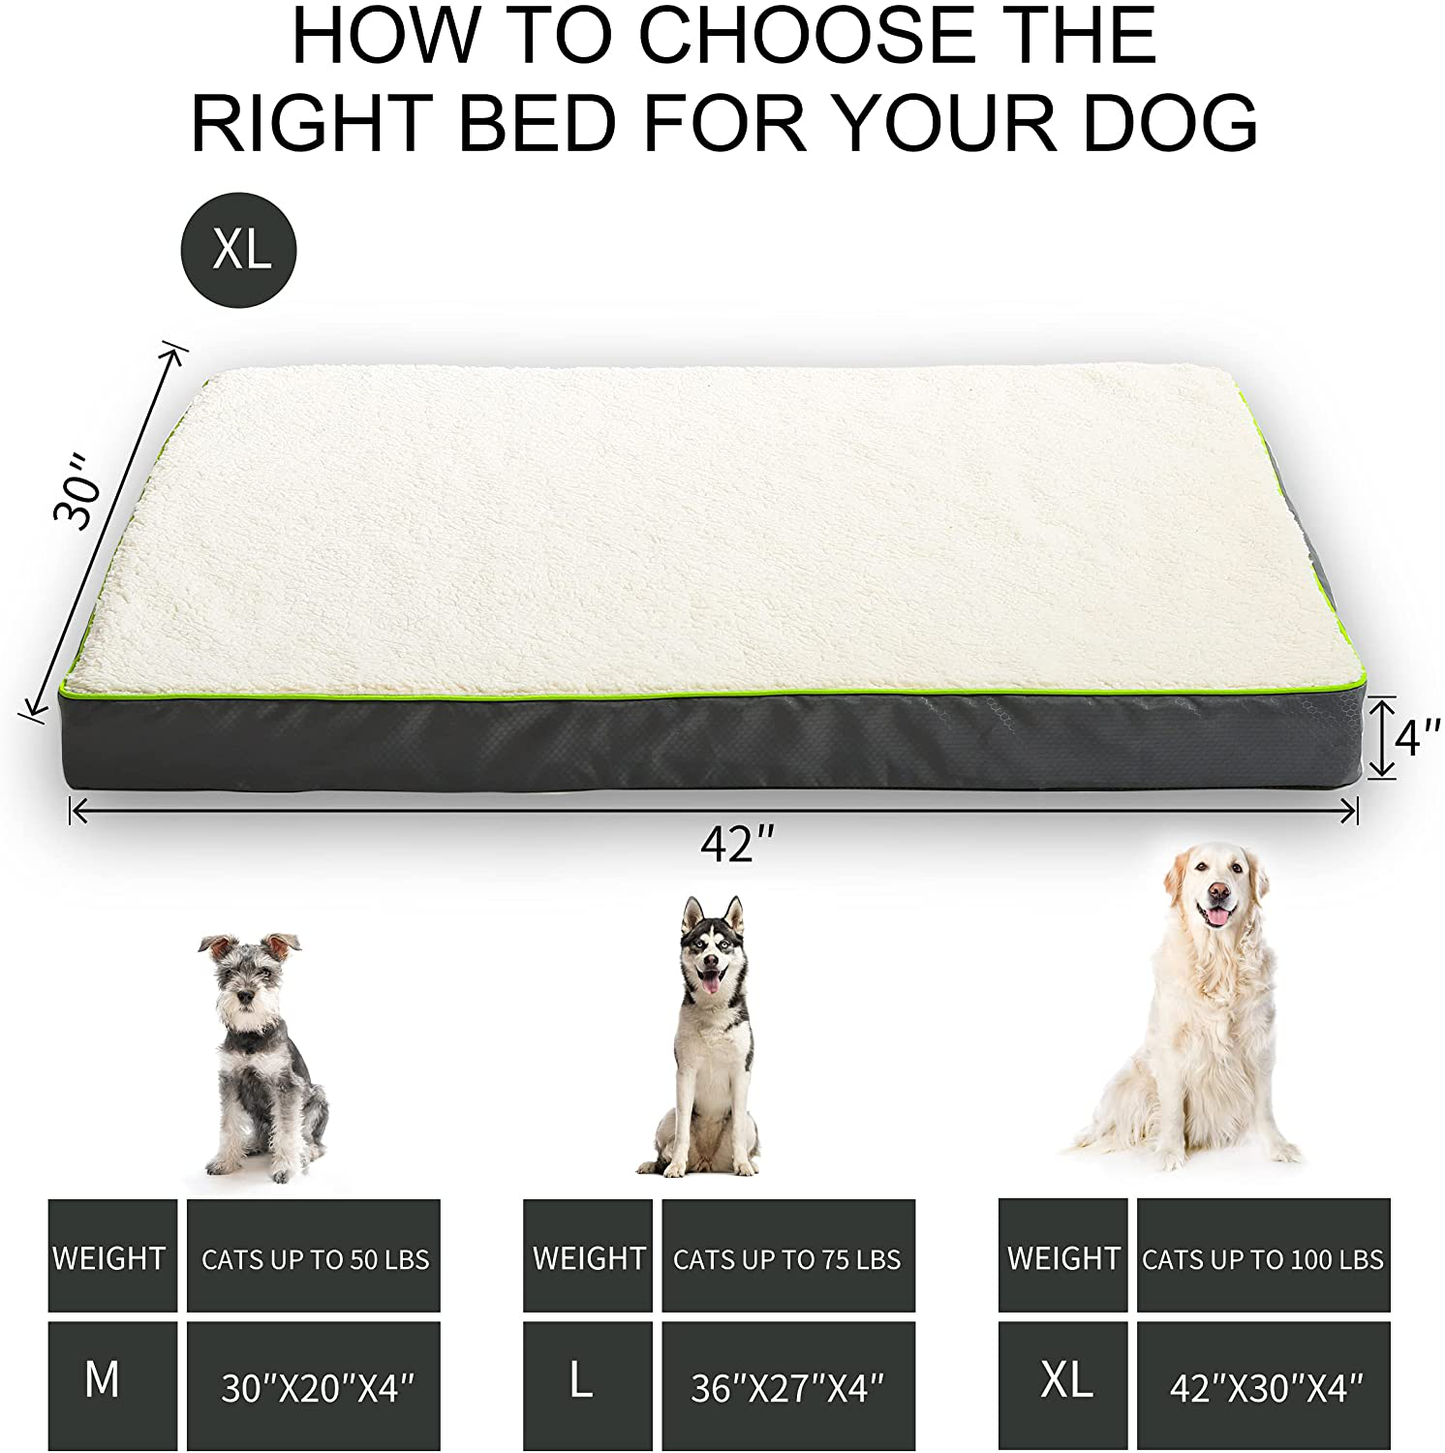 Hardy Buddy Oxford Egg Crate Foam Dog Bed for Small, Medium, Large Dogs, Thick Pet Bed Waterproof Mattress with Removable Washable Cover, Non-Slip Bottom